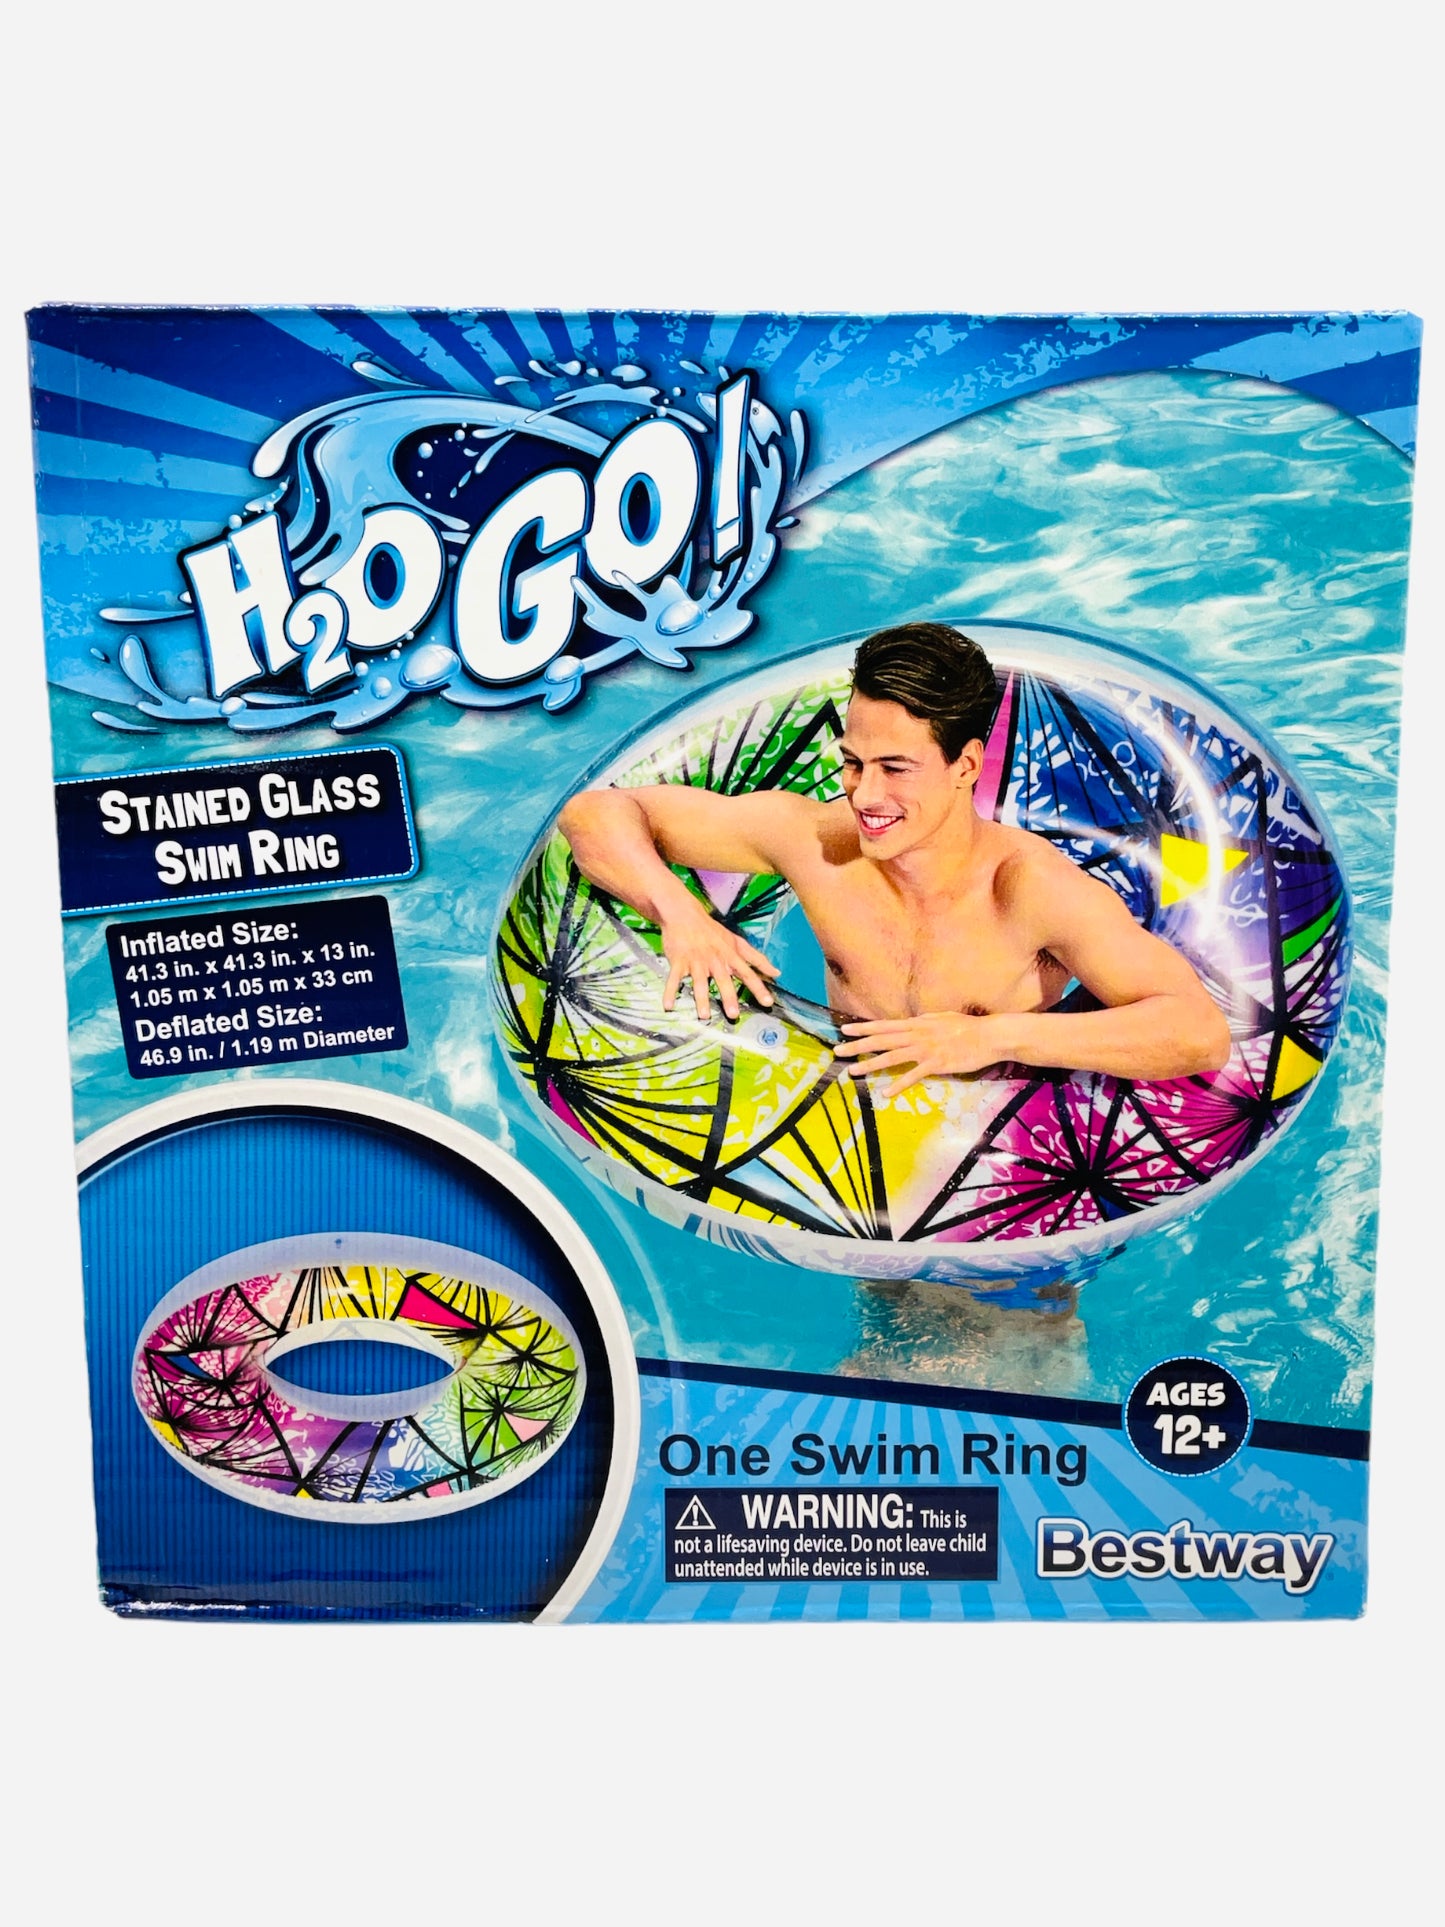 H2O Go Inflatable Stained Glass Swim Ring (Ages 12+)